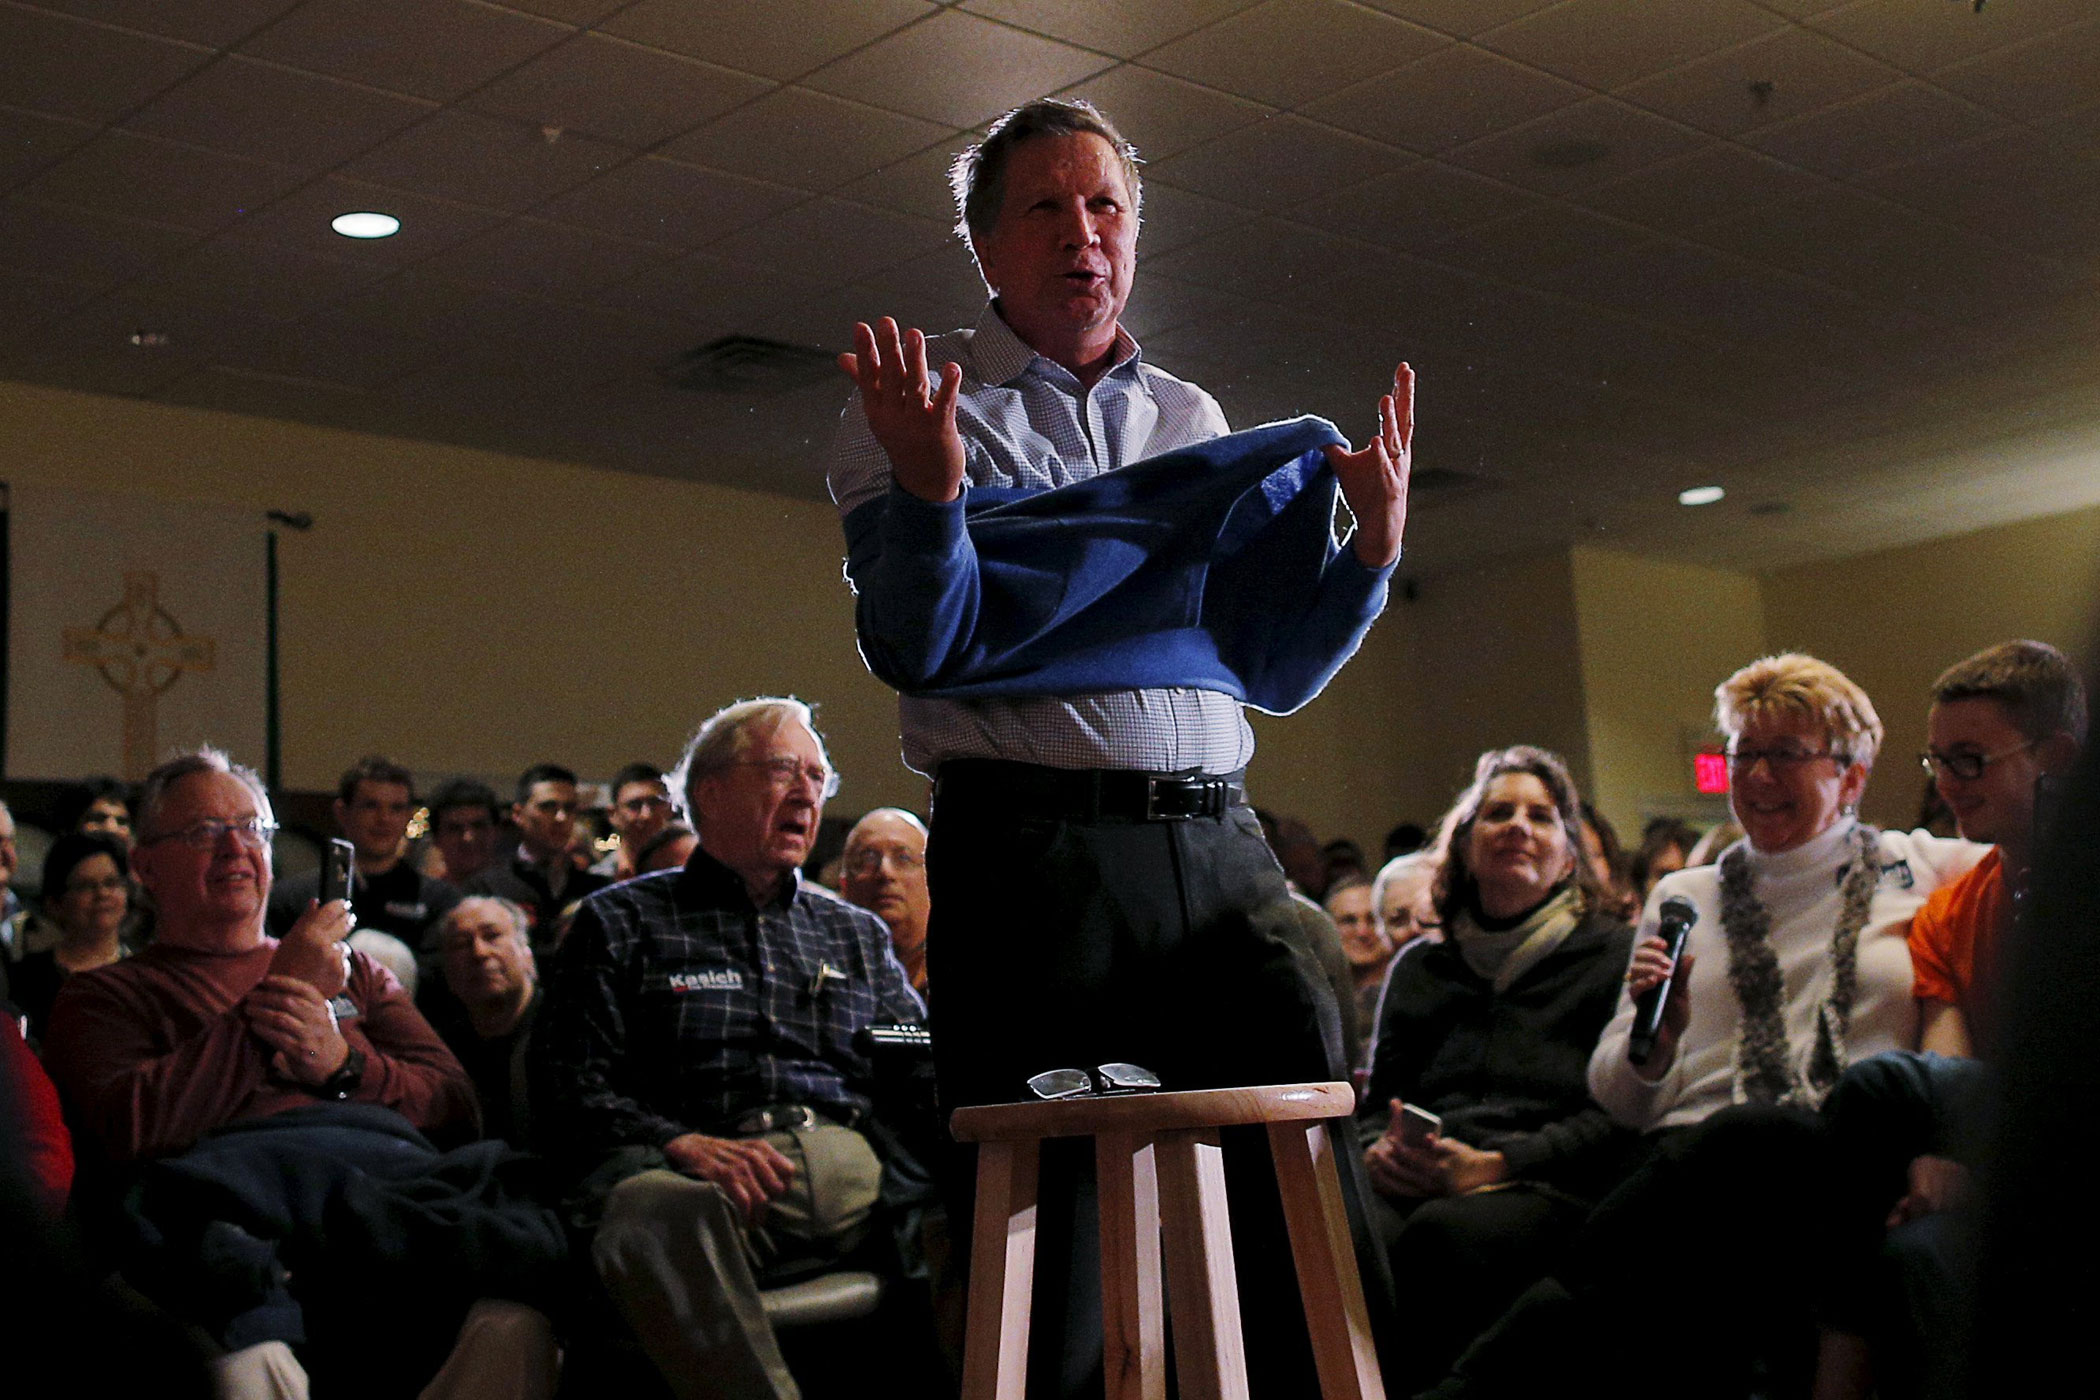 Republican presidential candidate, Ohio Gov. John Kasich takes off his sweater during a campaign town hall meeting in Worcester, Mass. on Feb. 20, 2016.